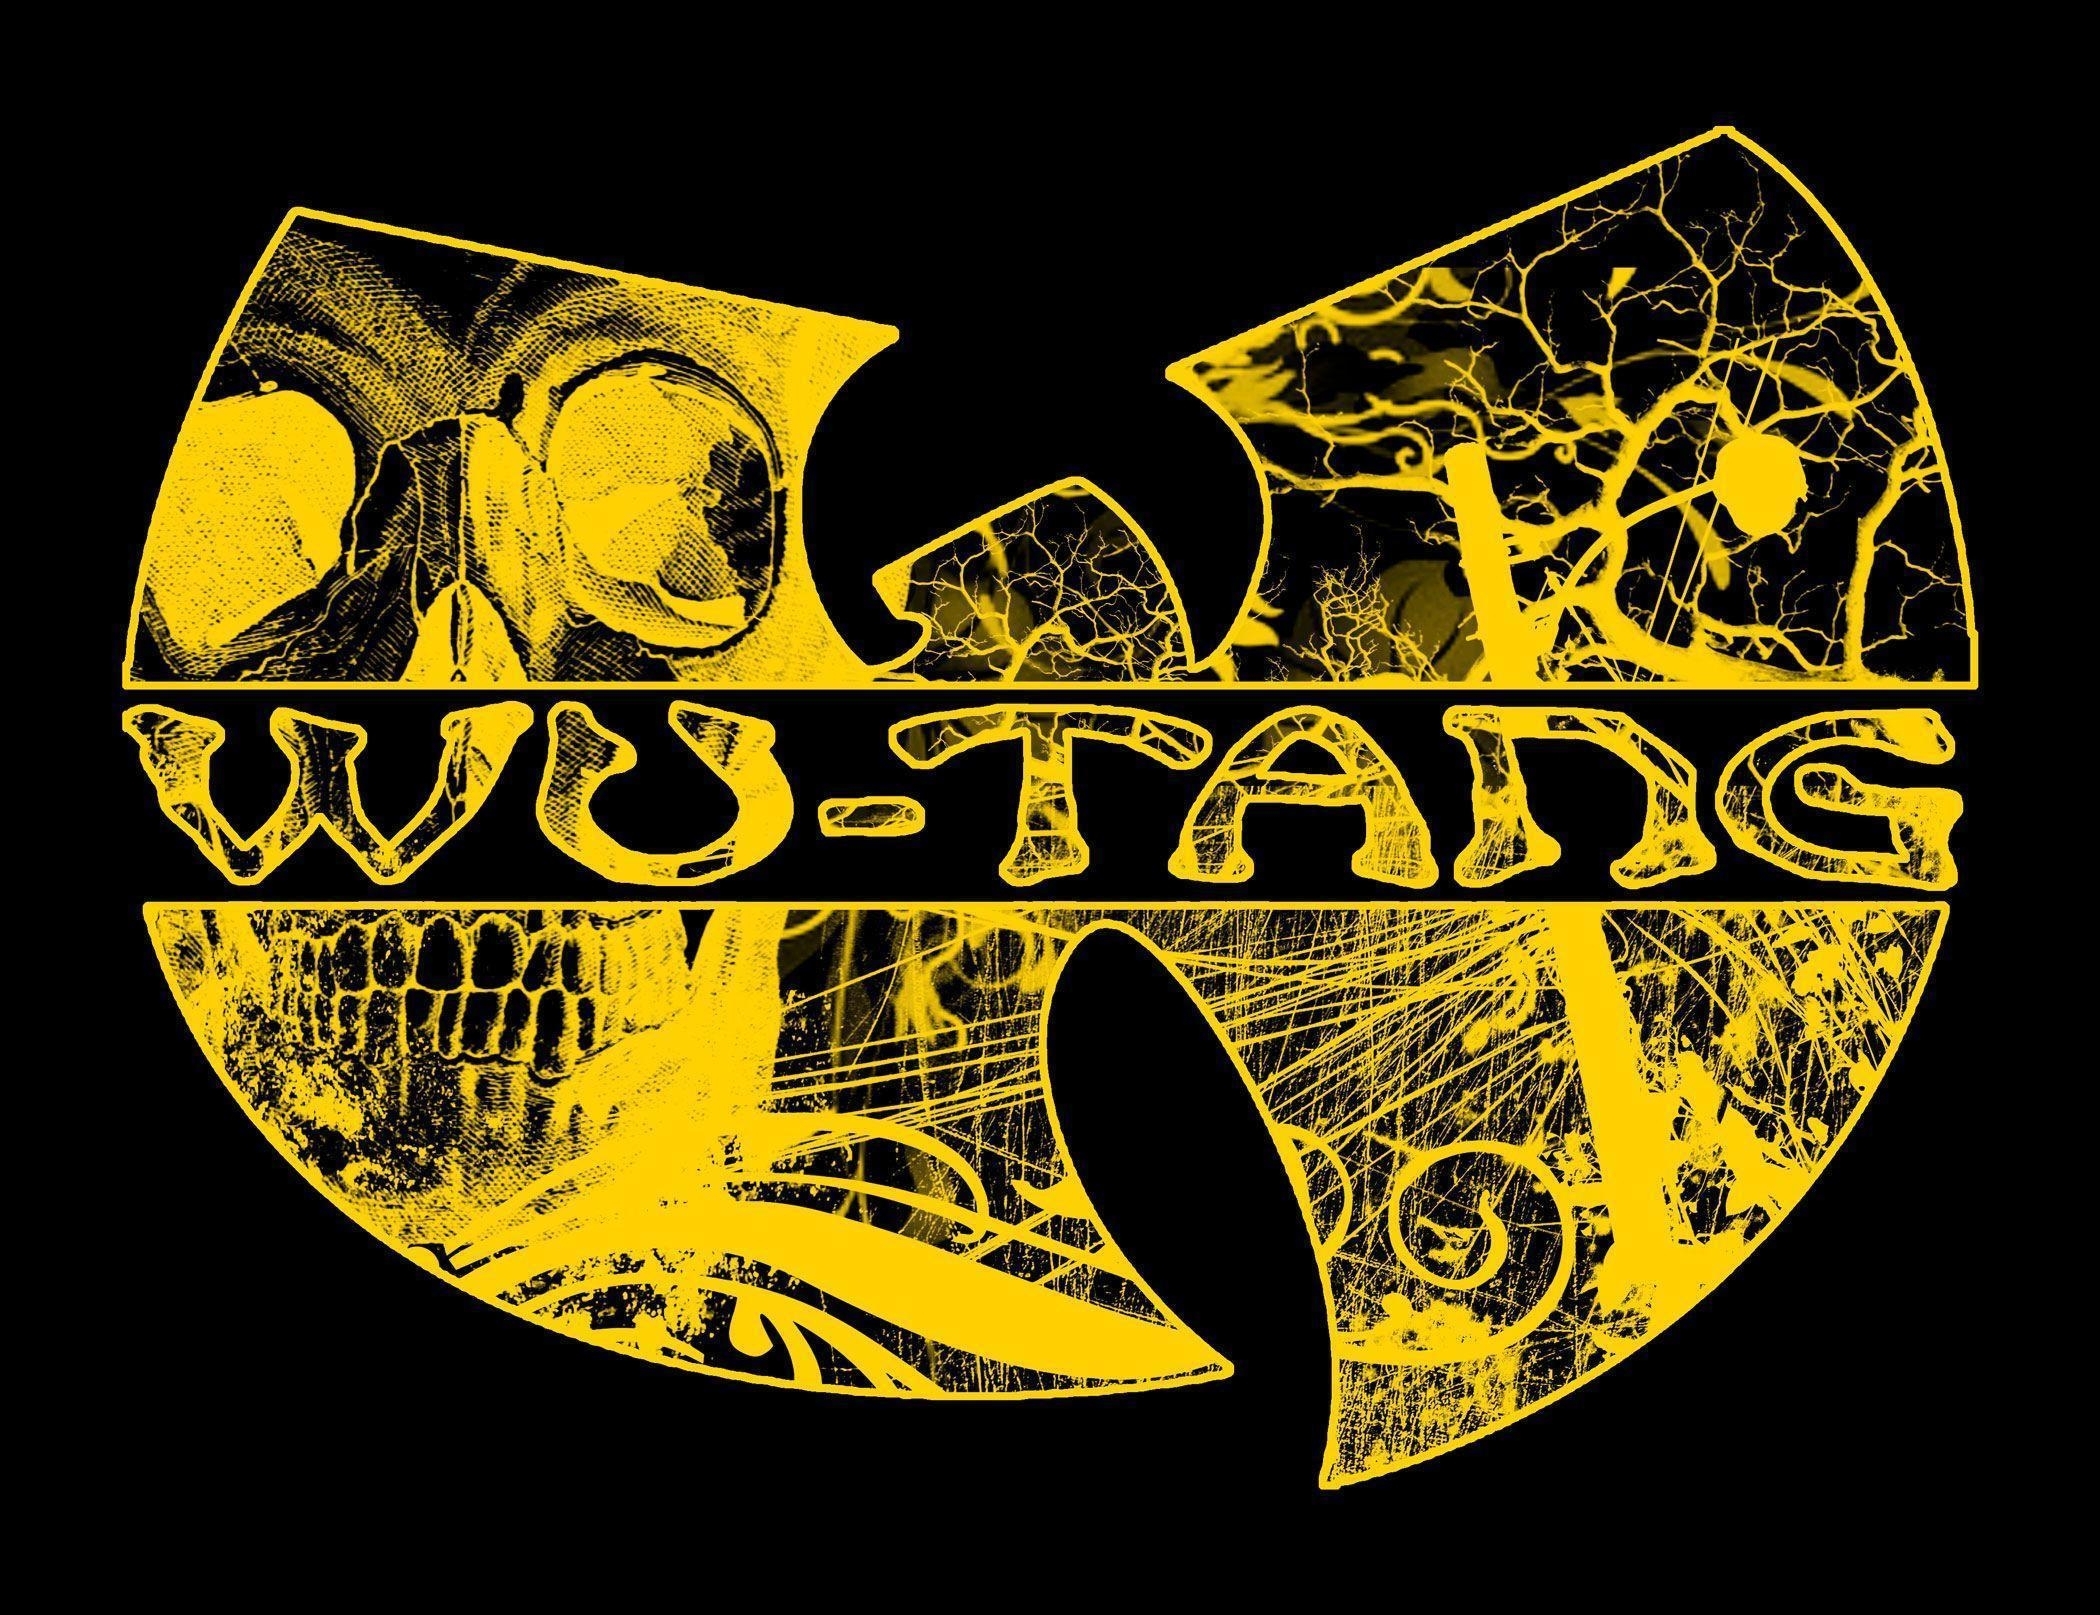 10 Best Wu Tang Clan Wallpaper FULL HD 1080p For PC Background